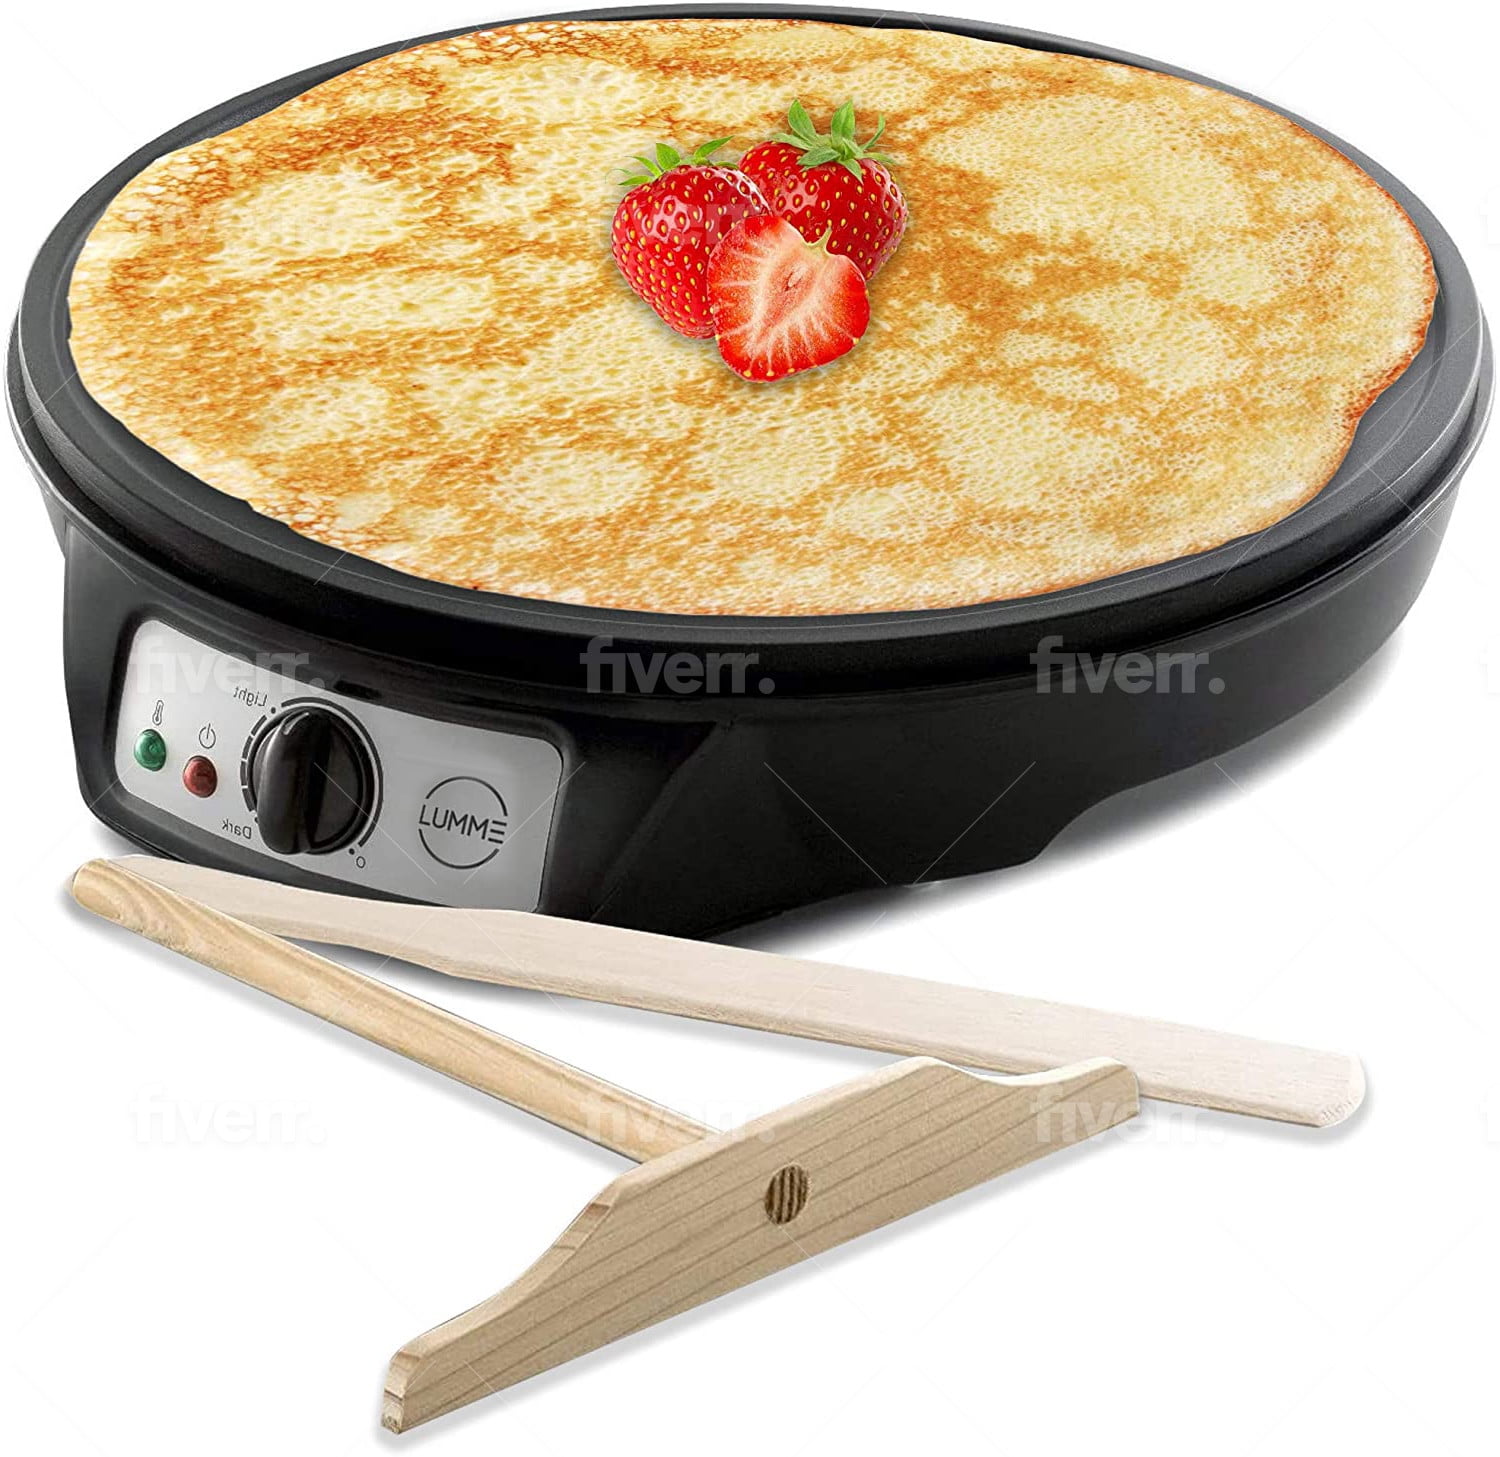 Pancake Maker Crepe Maker Machine Electric Non-Stick Cooker with Accessories & Adjustable Temperature Control 600W,Pink 